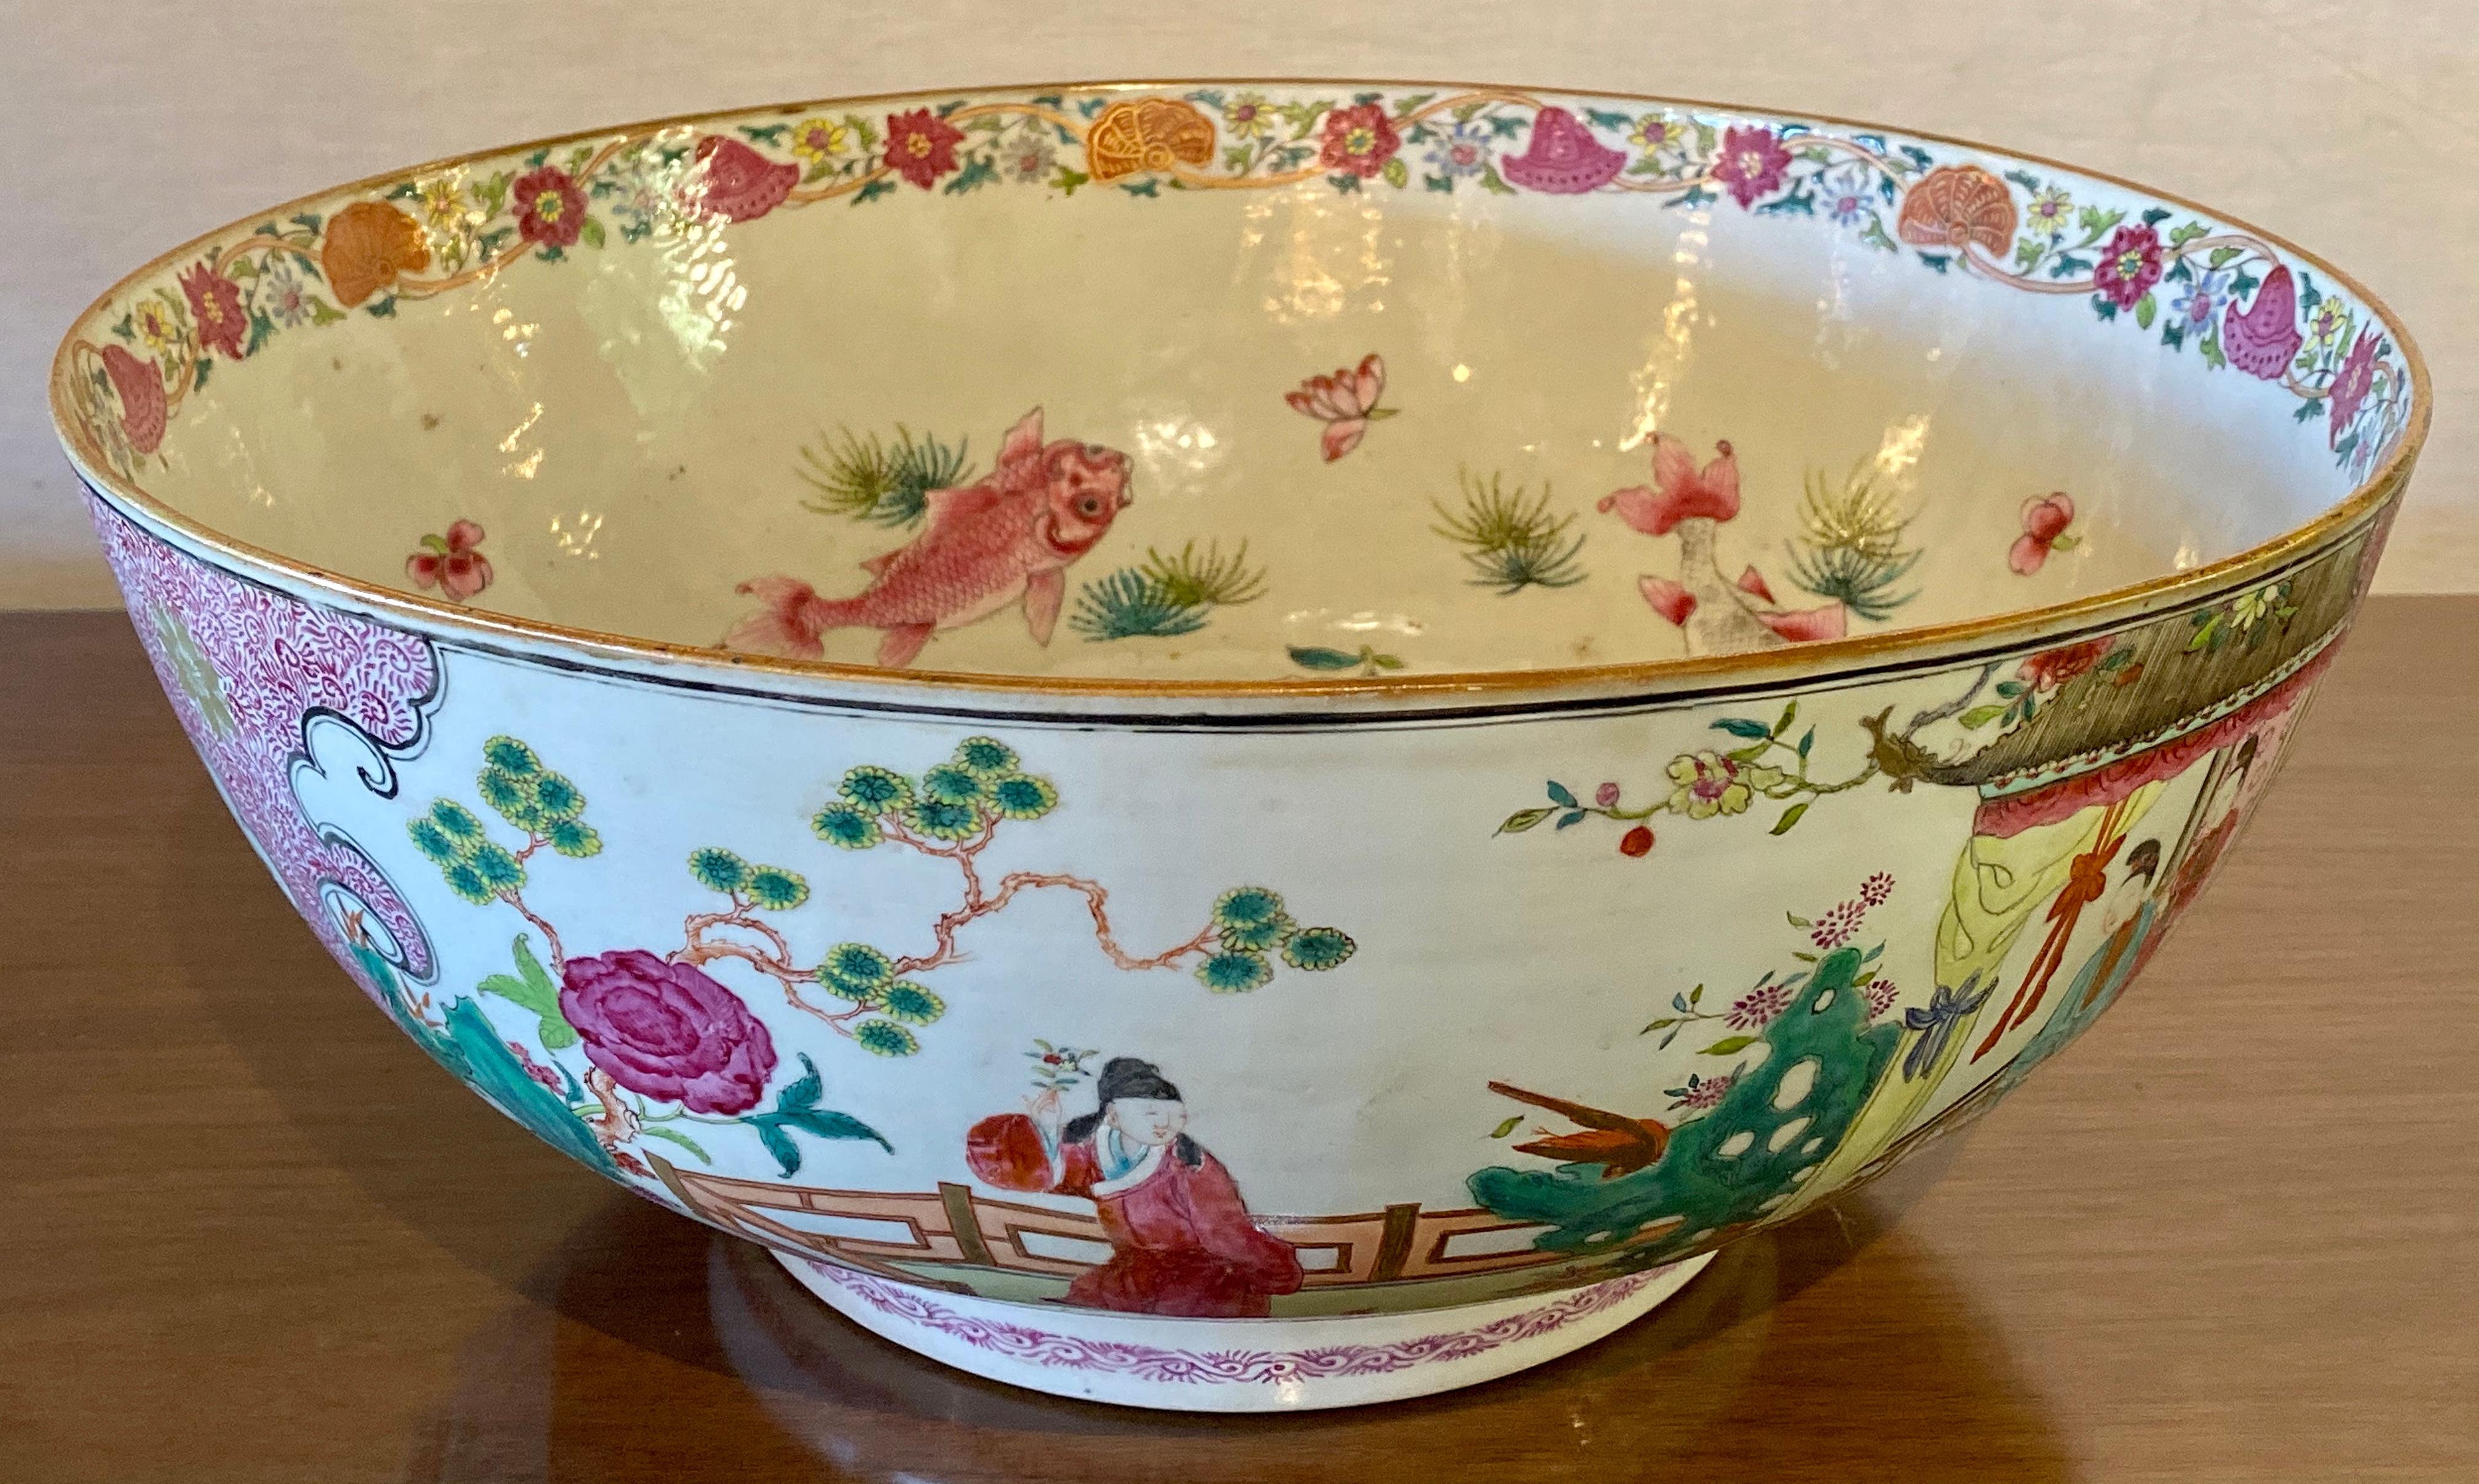 Fine Ch'ing dynasty export Famille Rose large punch bowl, hand-painted porcelain, in very colorful everyday scenes of the upper socioeconomic level of Chinese society during the period of the late 18th century (circa 1785). Fruit, floral, and avian